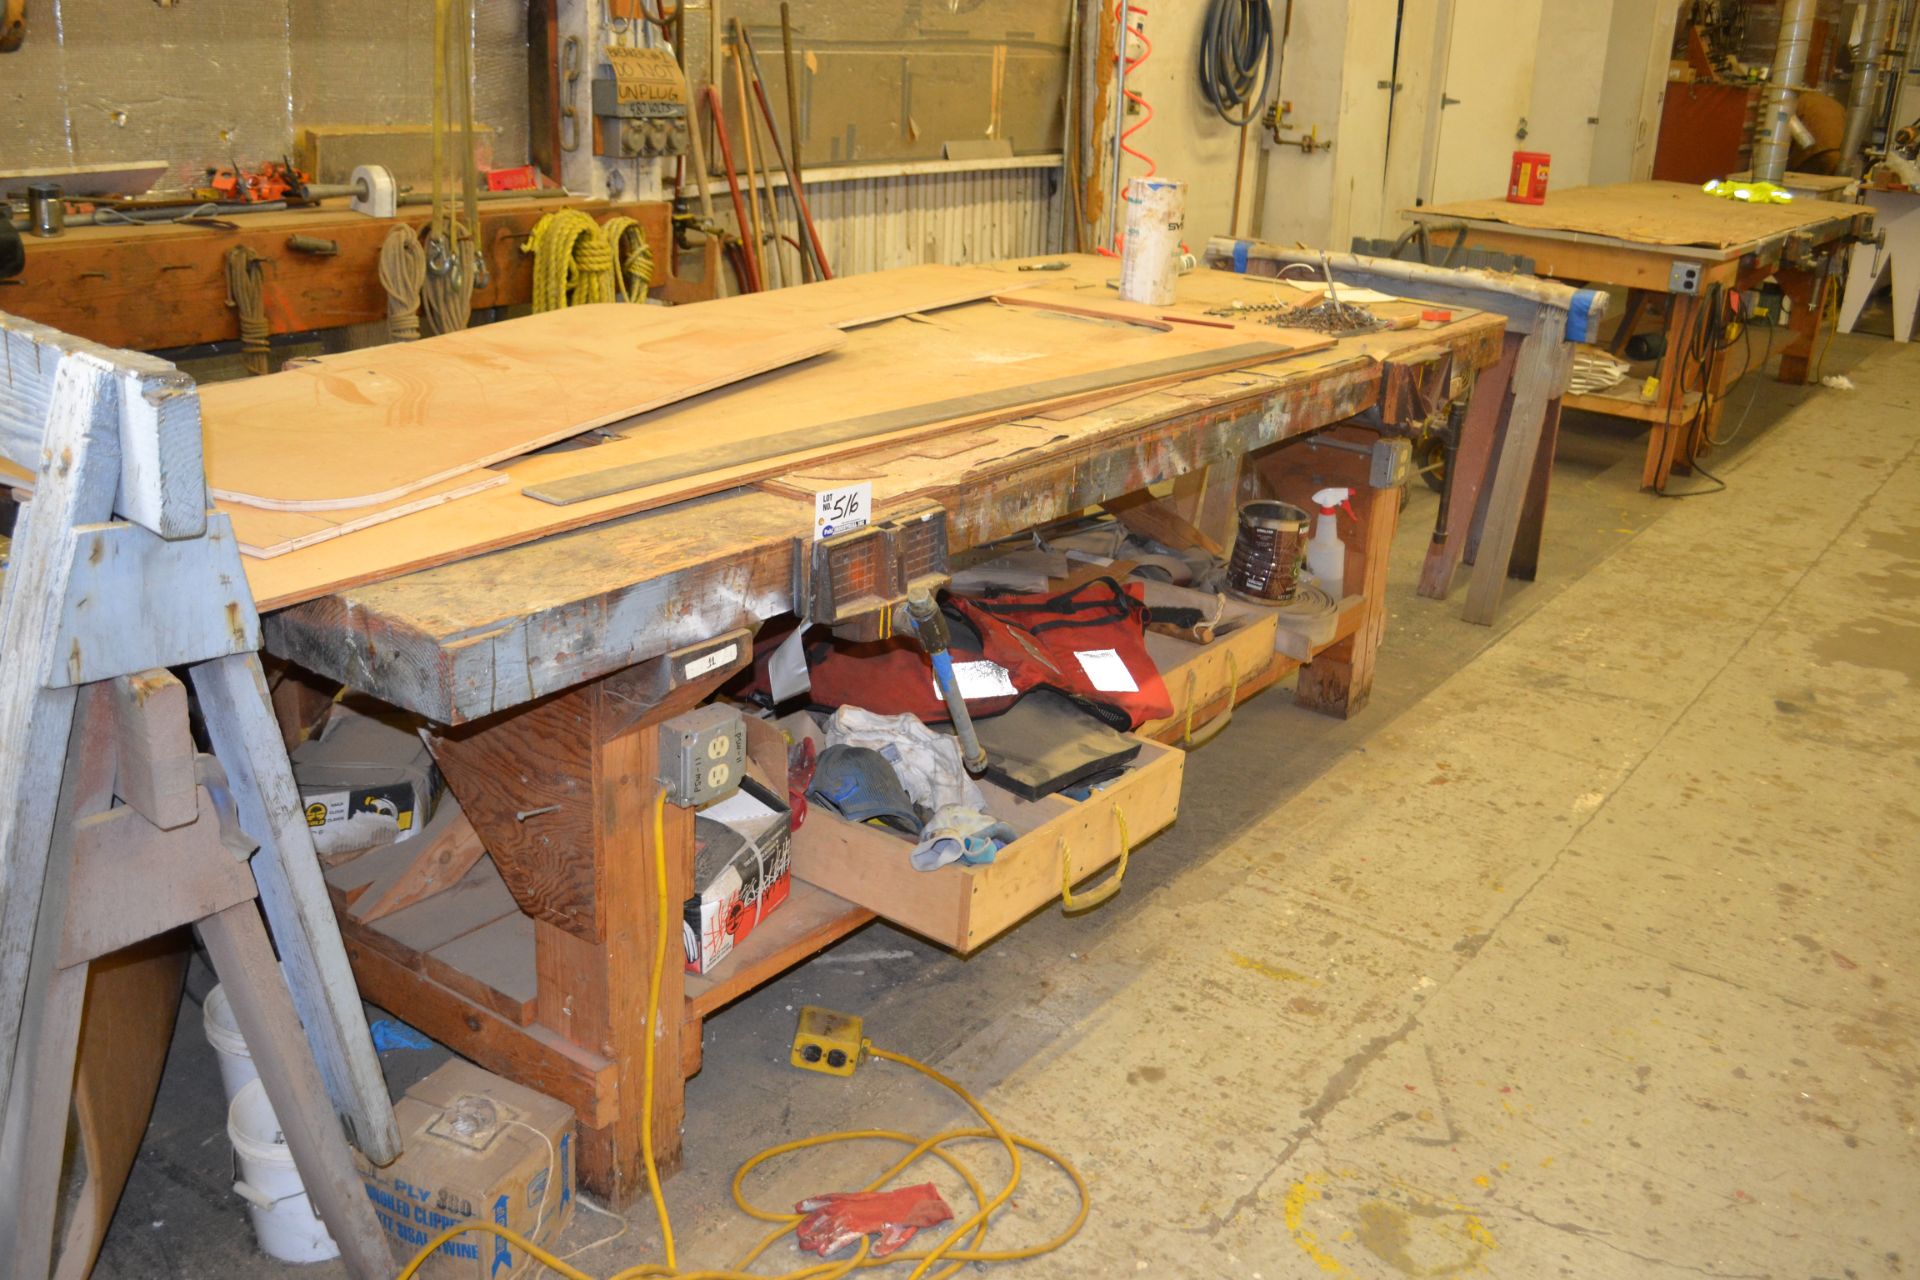 (2) 10' x 4' wooden layout table w/ 2 vises